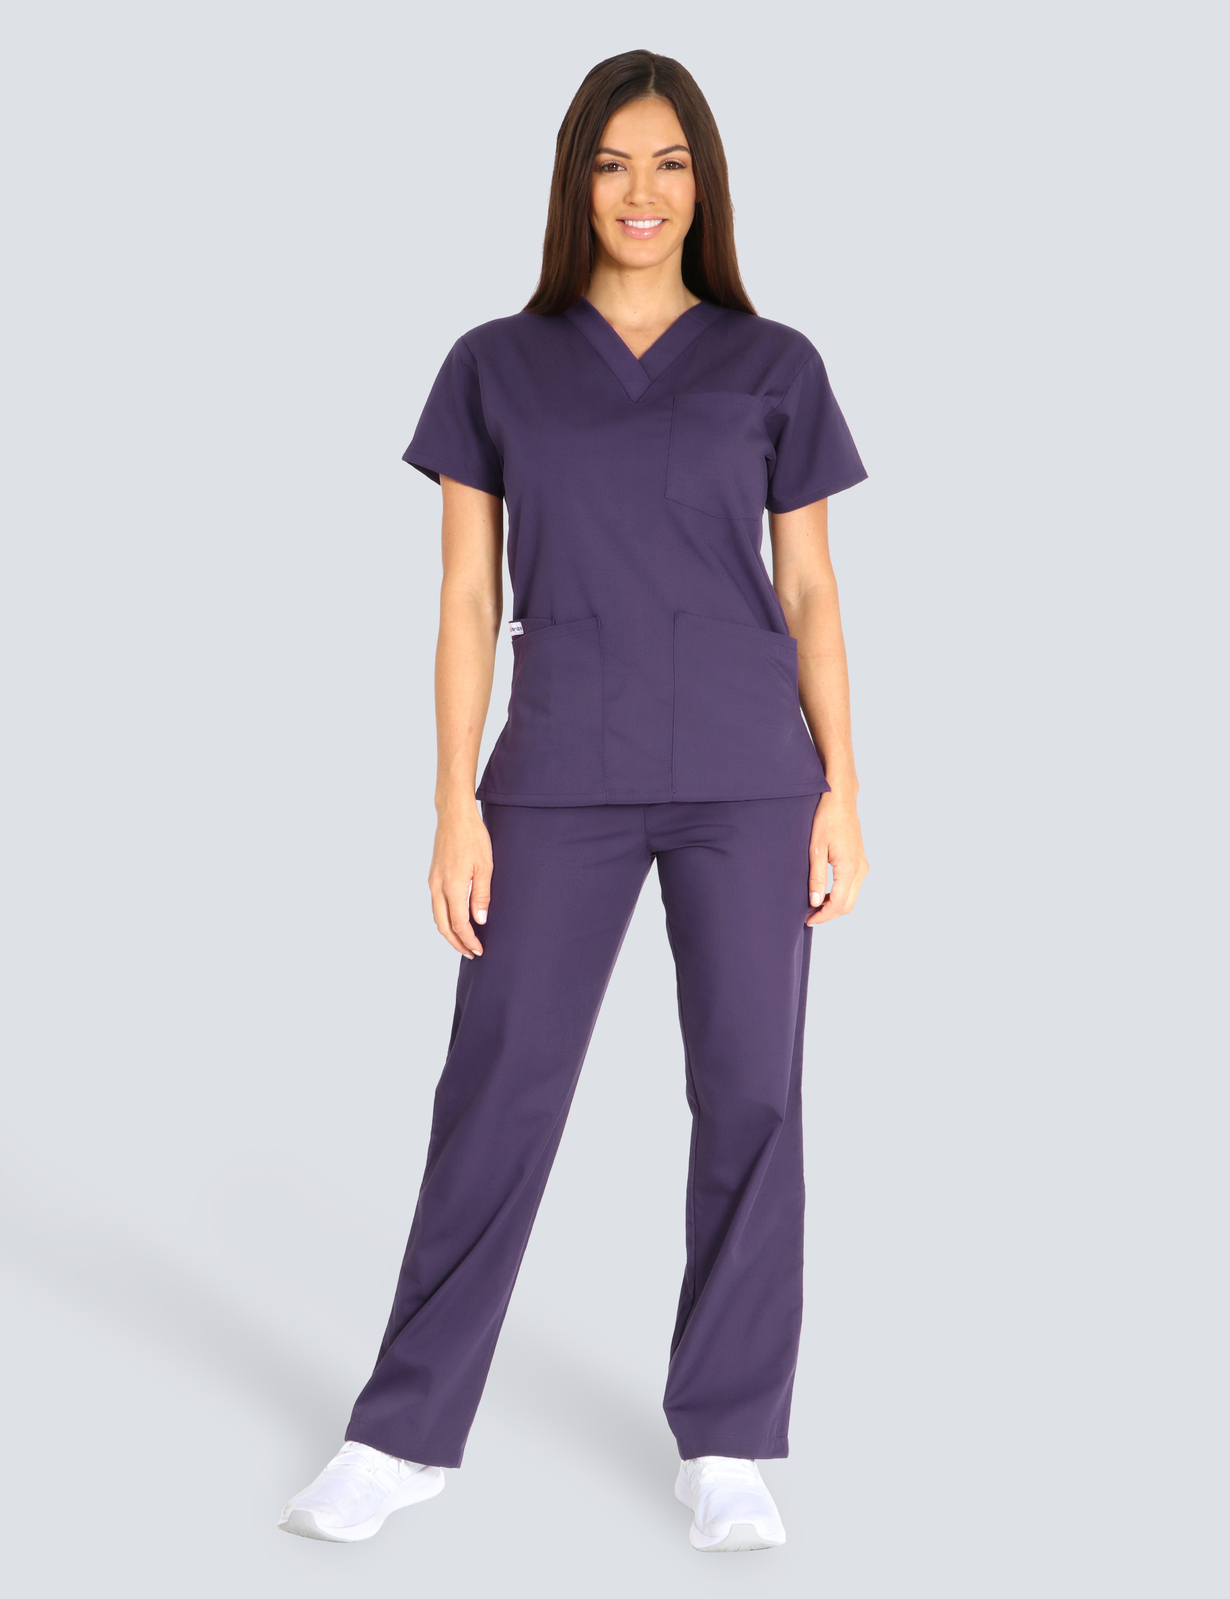 The Angliss Hospital - MI (4 Pocket Scrub Top and Cargo Pants in Aubergine incl Logos)